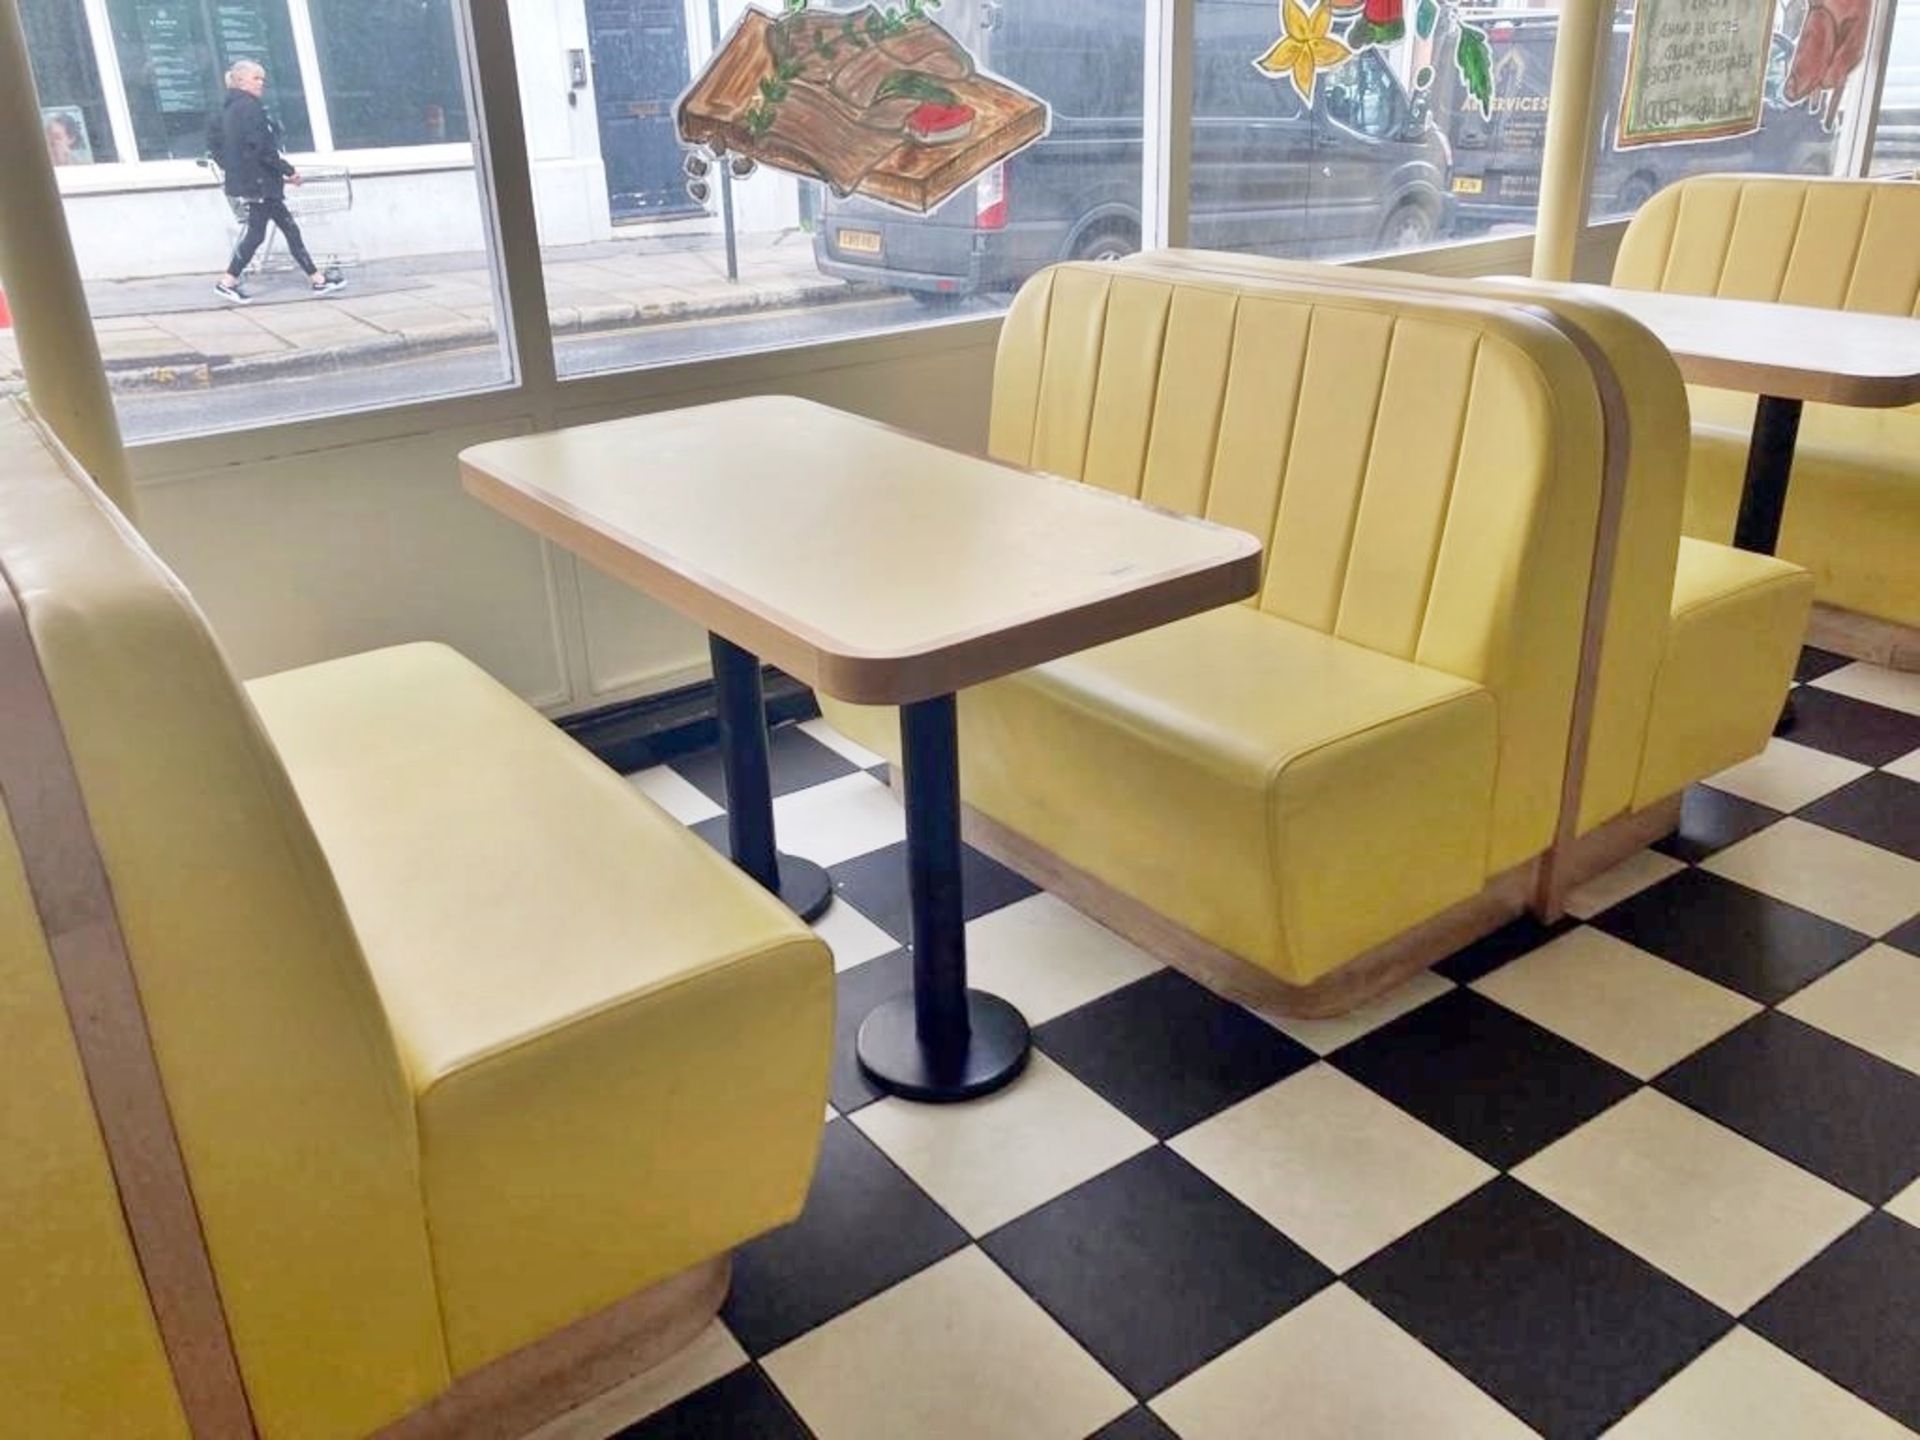 8 x Restaurant Dining Chairs With Chrome Bases and Faux Leather Upholstery Finished in Lemon and - Image 2 of 7